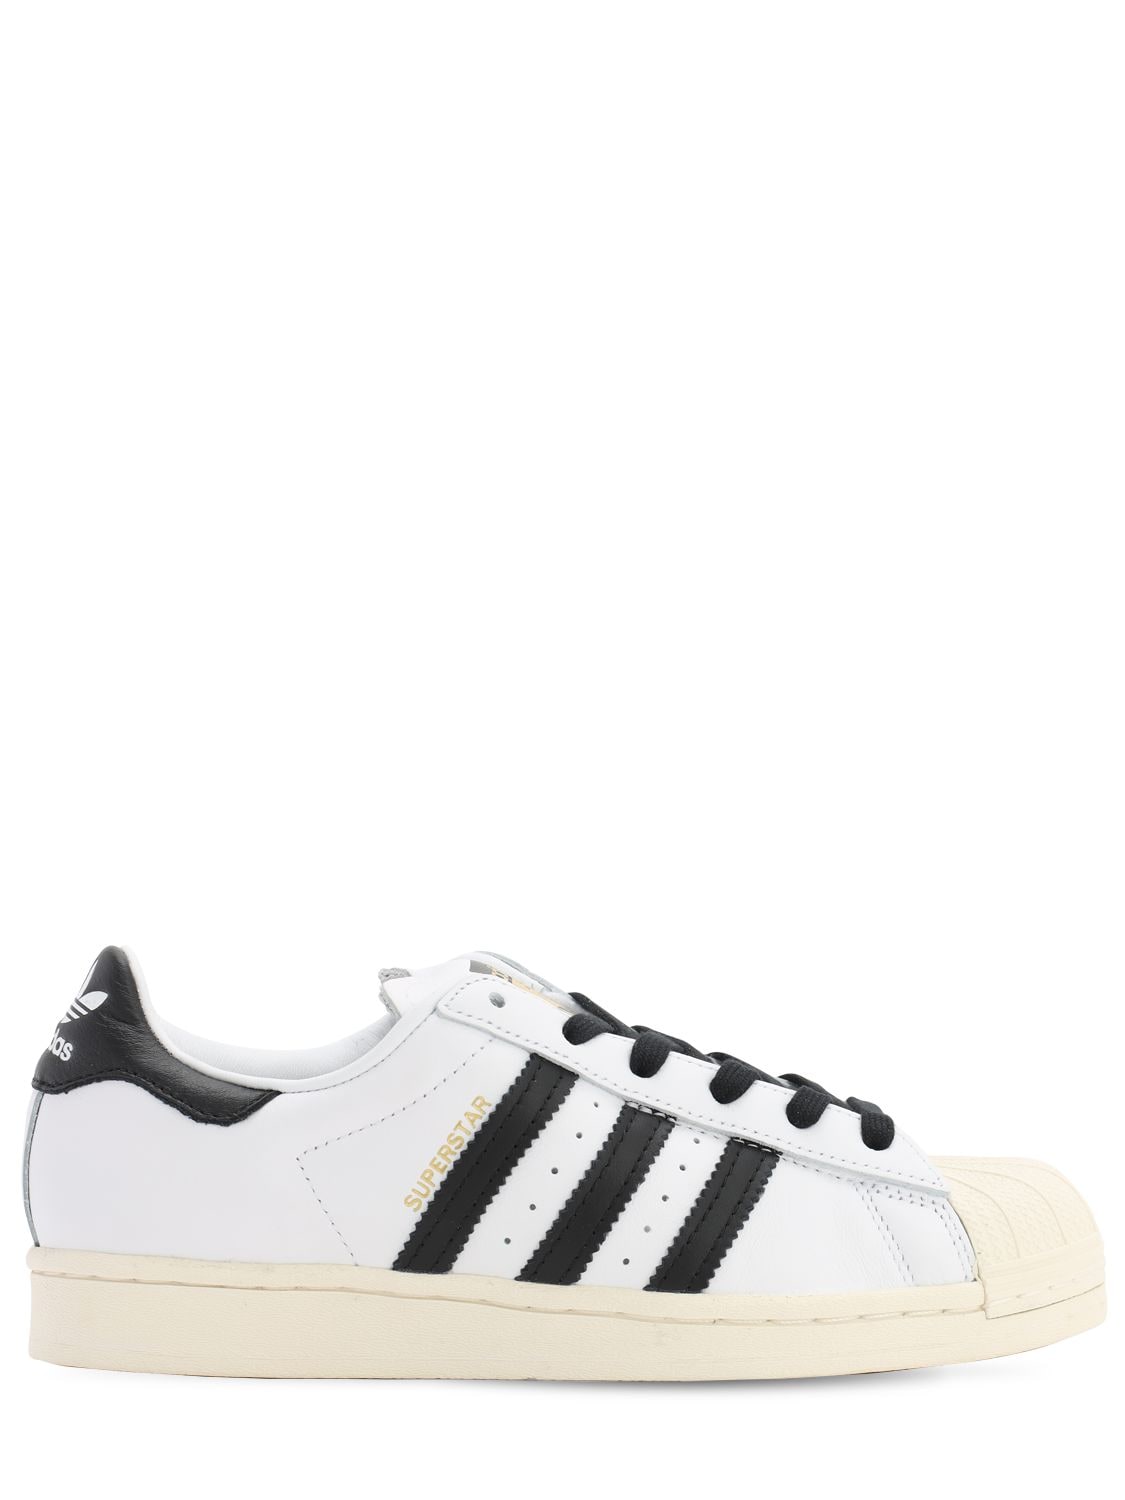 Adidas Originals Superstar Laceless Courtside Sneakers In White,black ...